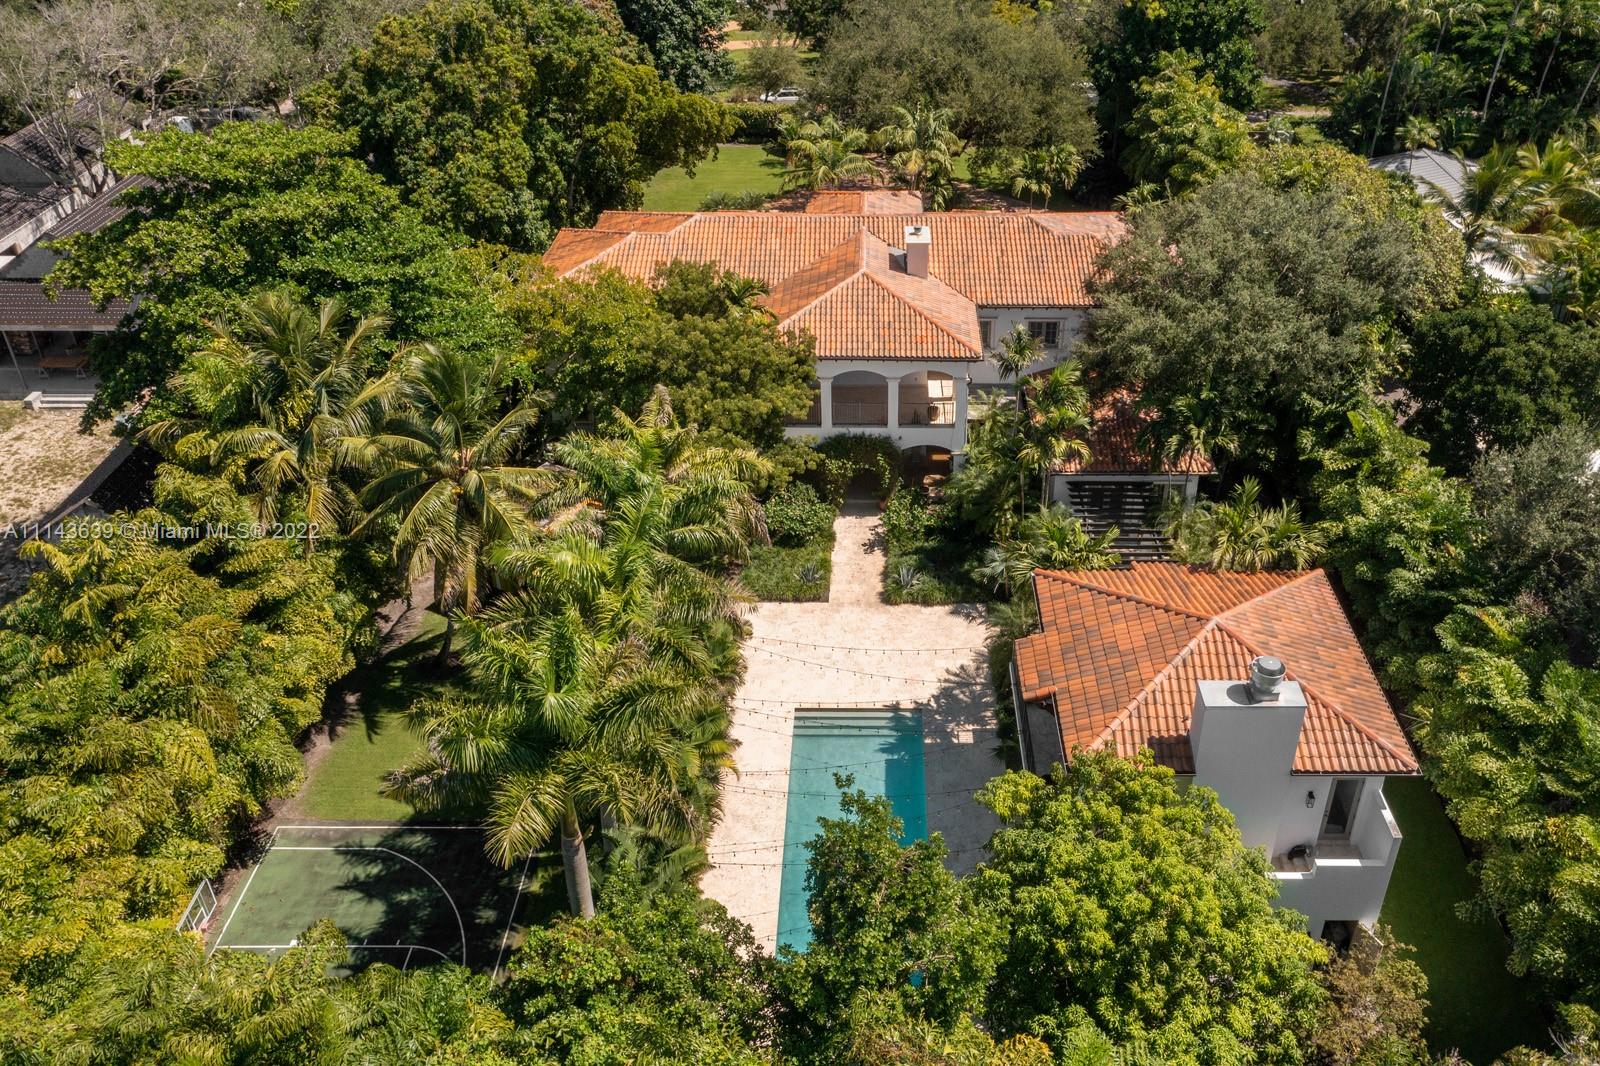 This Ponce-Davis Mediterranean estate is nestled on a 1-acre lot on a quiet cul-de-sac street with grand oak trees and exotic flora that encapsulate the property. Influenced by traditional Old-World designs, residents are immediately greeted by a romantic courtyard lined with lamp post-lit columns and led into a palatial foyer that’s gilded in light marble flooring and bright, tall ceilings. A spacious chef’s kitchen with luxury accouterments and a large center island makes for an idyllic destination to entertain, featuring a breakfast nook for daily gatherings. However, the highlight of the property is its expansive backyard, featuring a gourmet summer kitchen, covered dining area, and sparkling pool and jacuzzi. Extra features: game room and full gym with access to indoor-outdoor living.